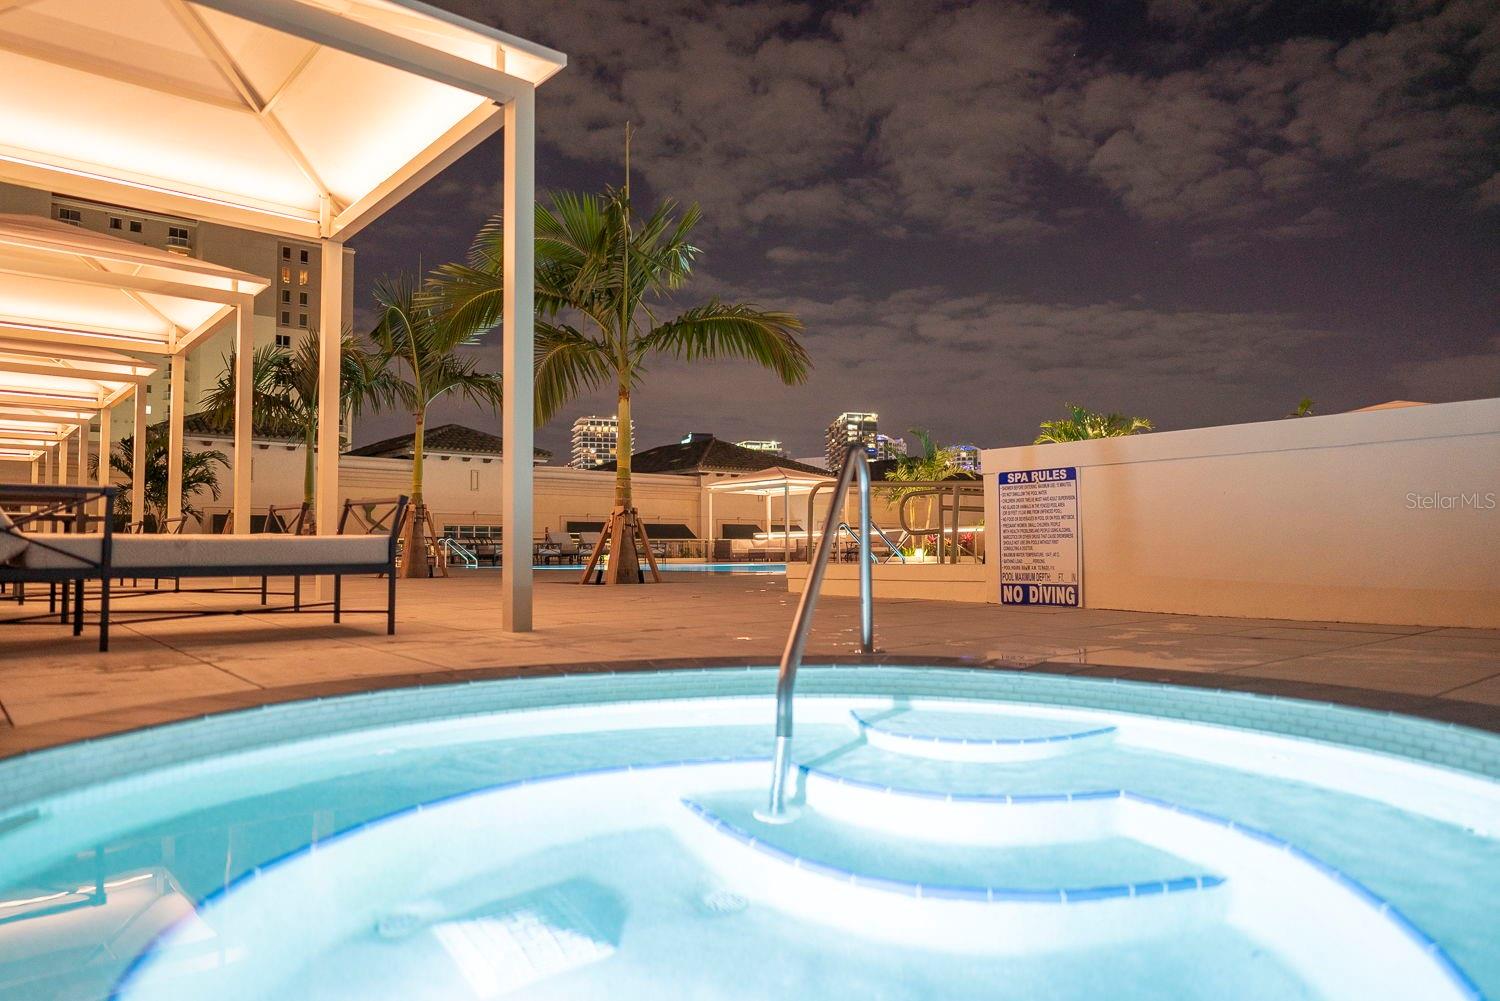 Indulge in relaxation with the hot tub conveniently located near the pool, complete with a pool shower.